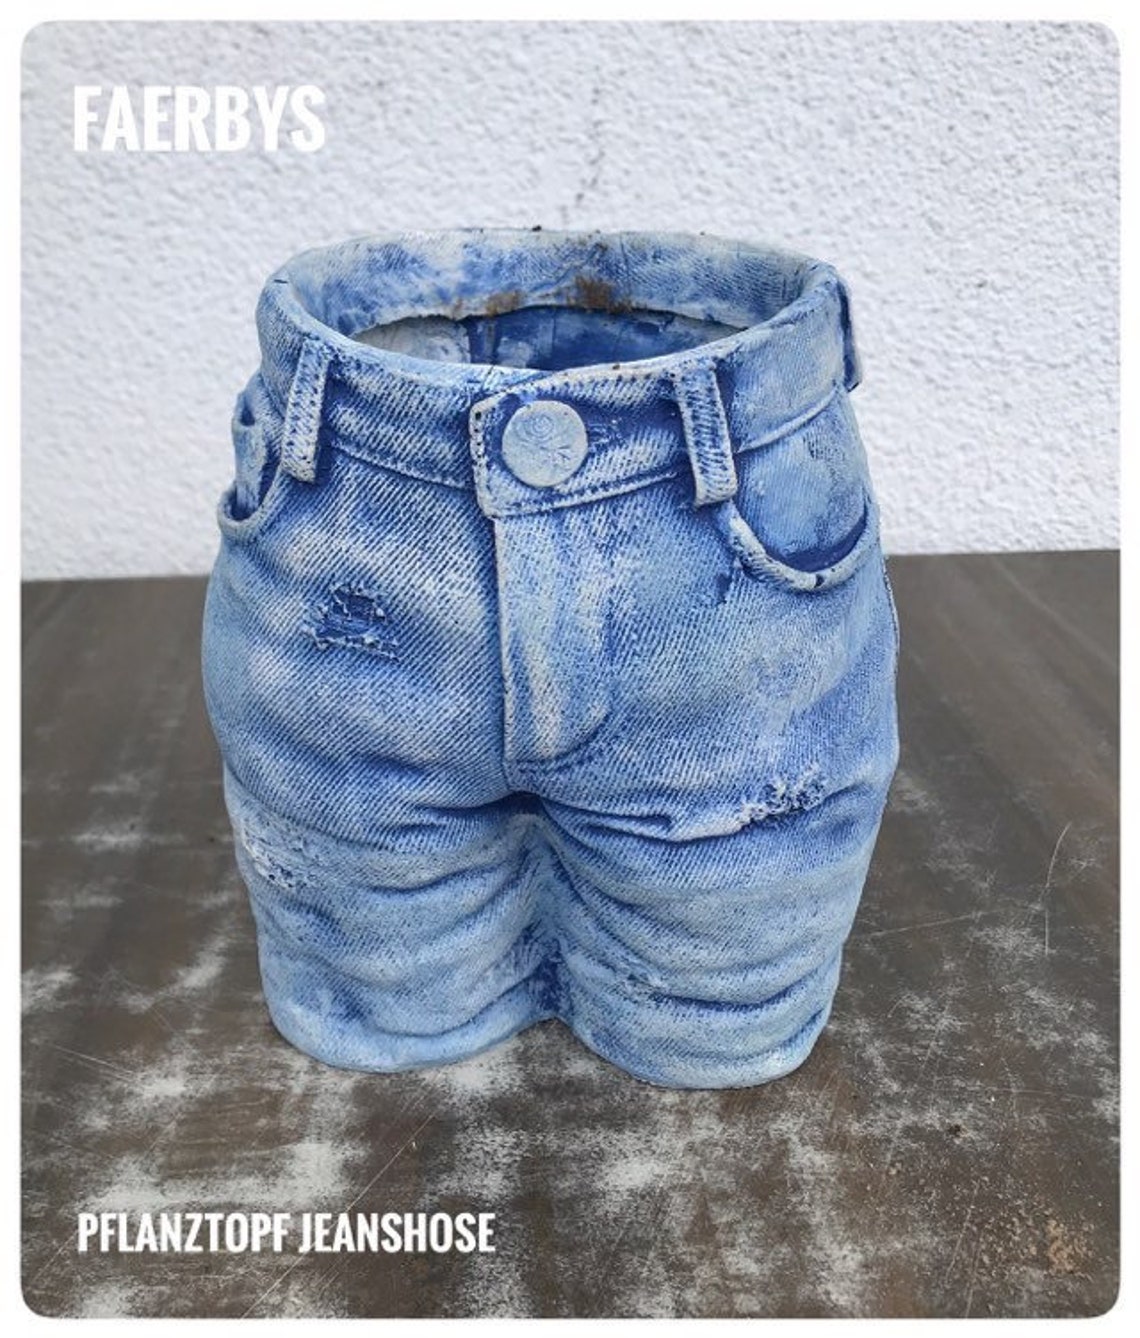 Planting pants jeans cast in concrete lovingly patinated | Etsy